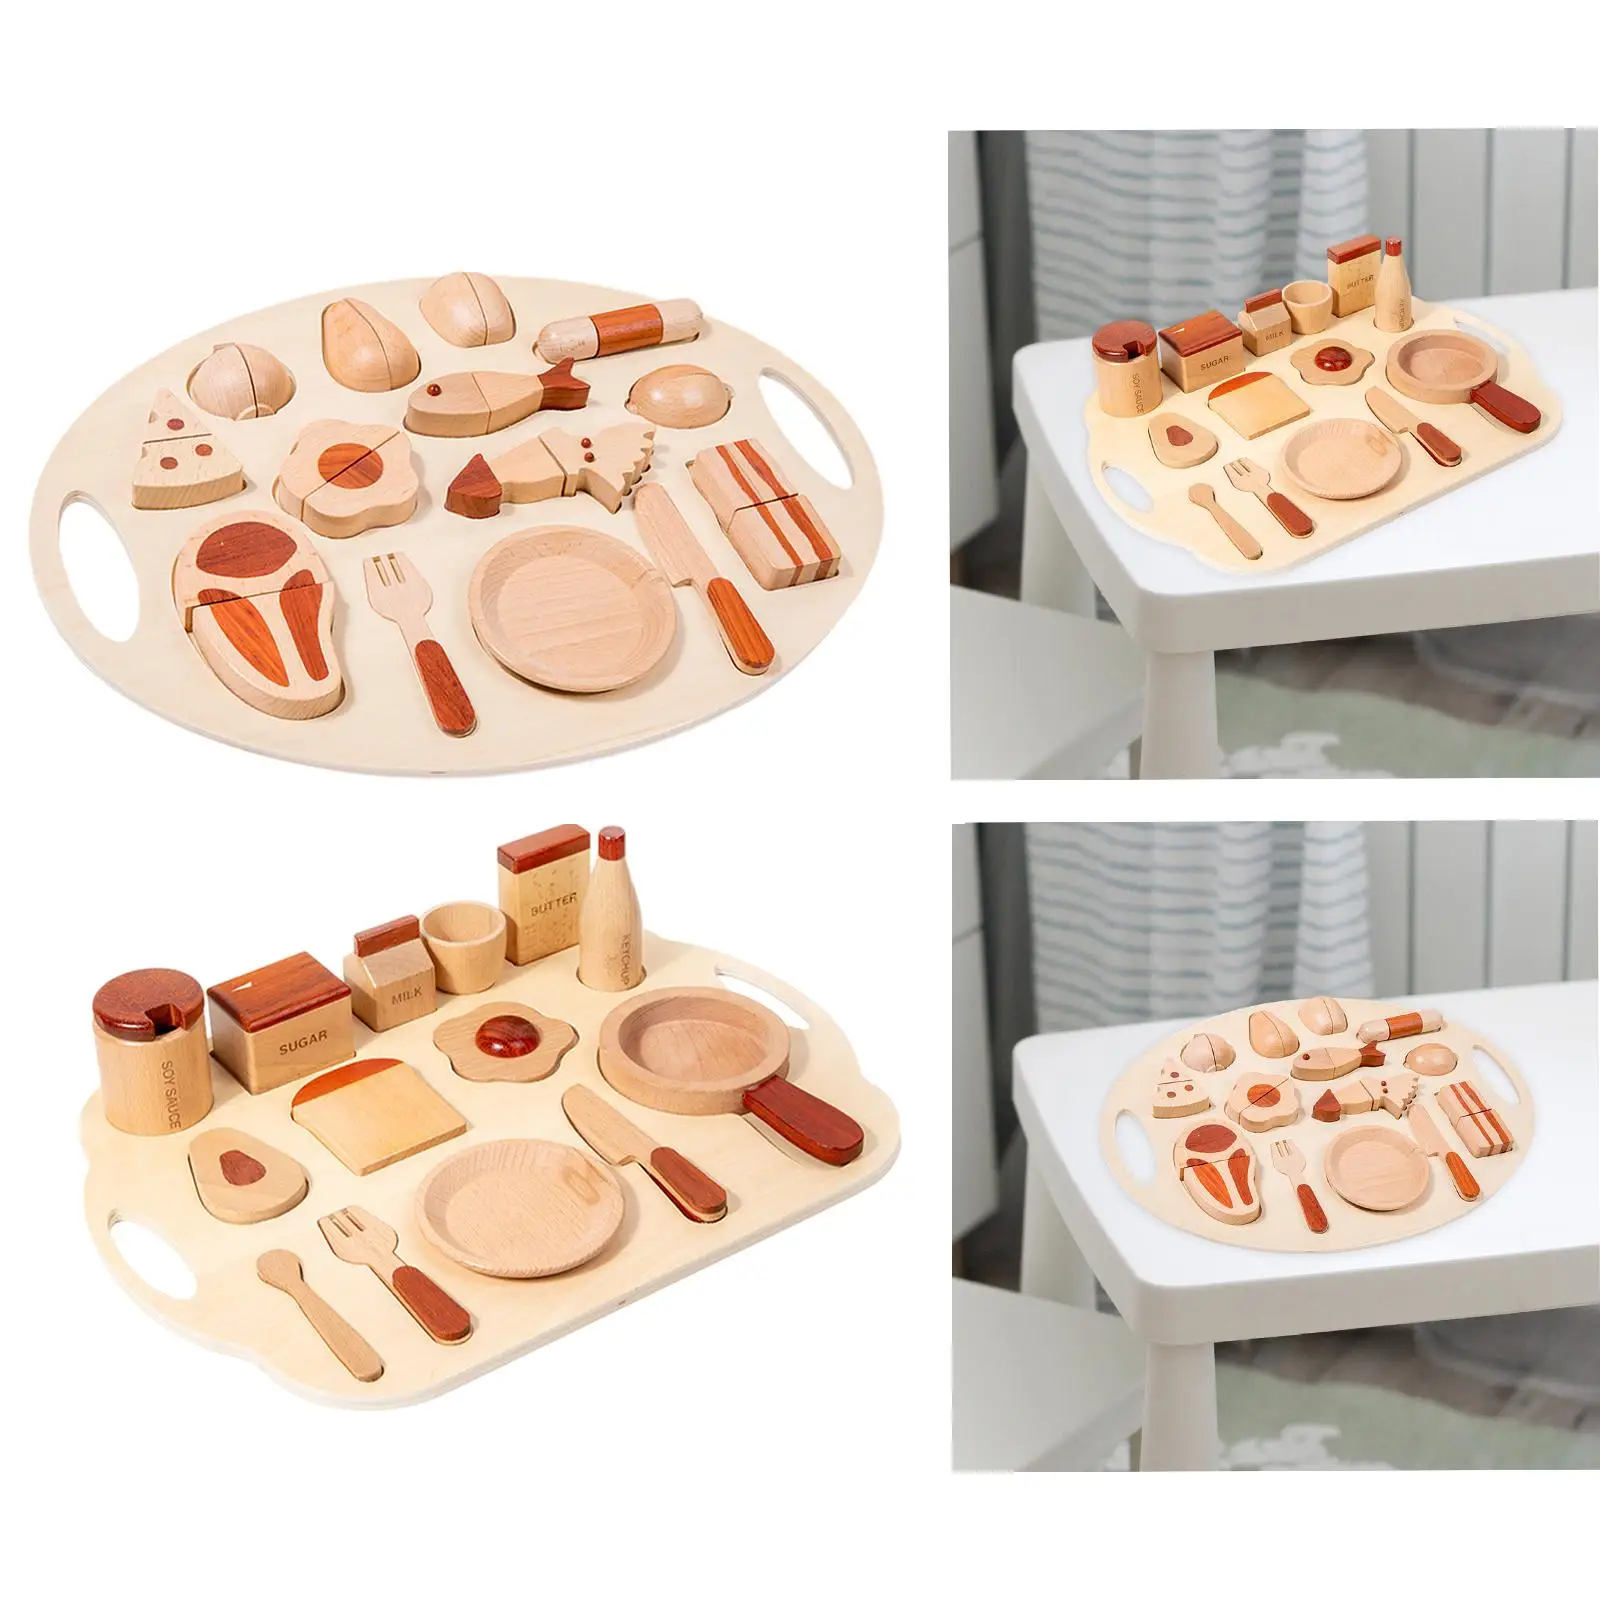 15x Kitchen Accessories Pretend Play Realistic Wood Cutting Fruits Toys